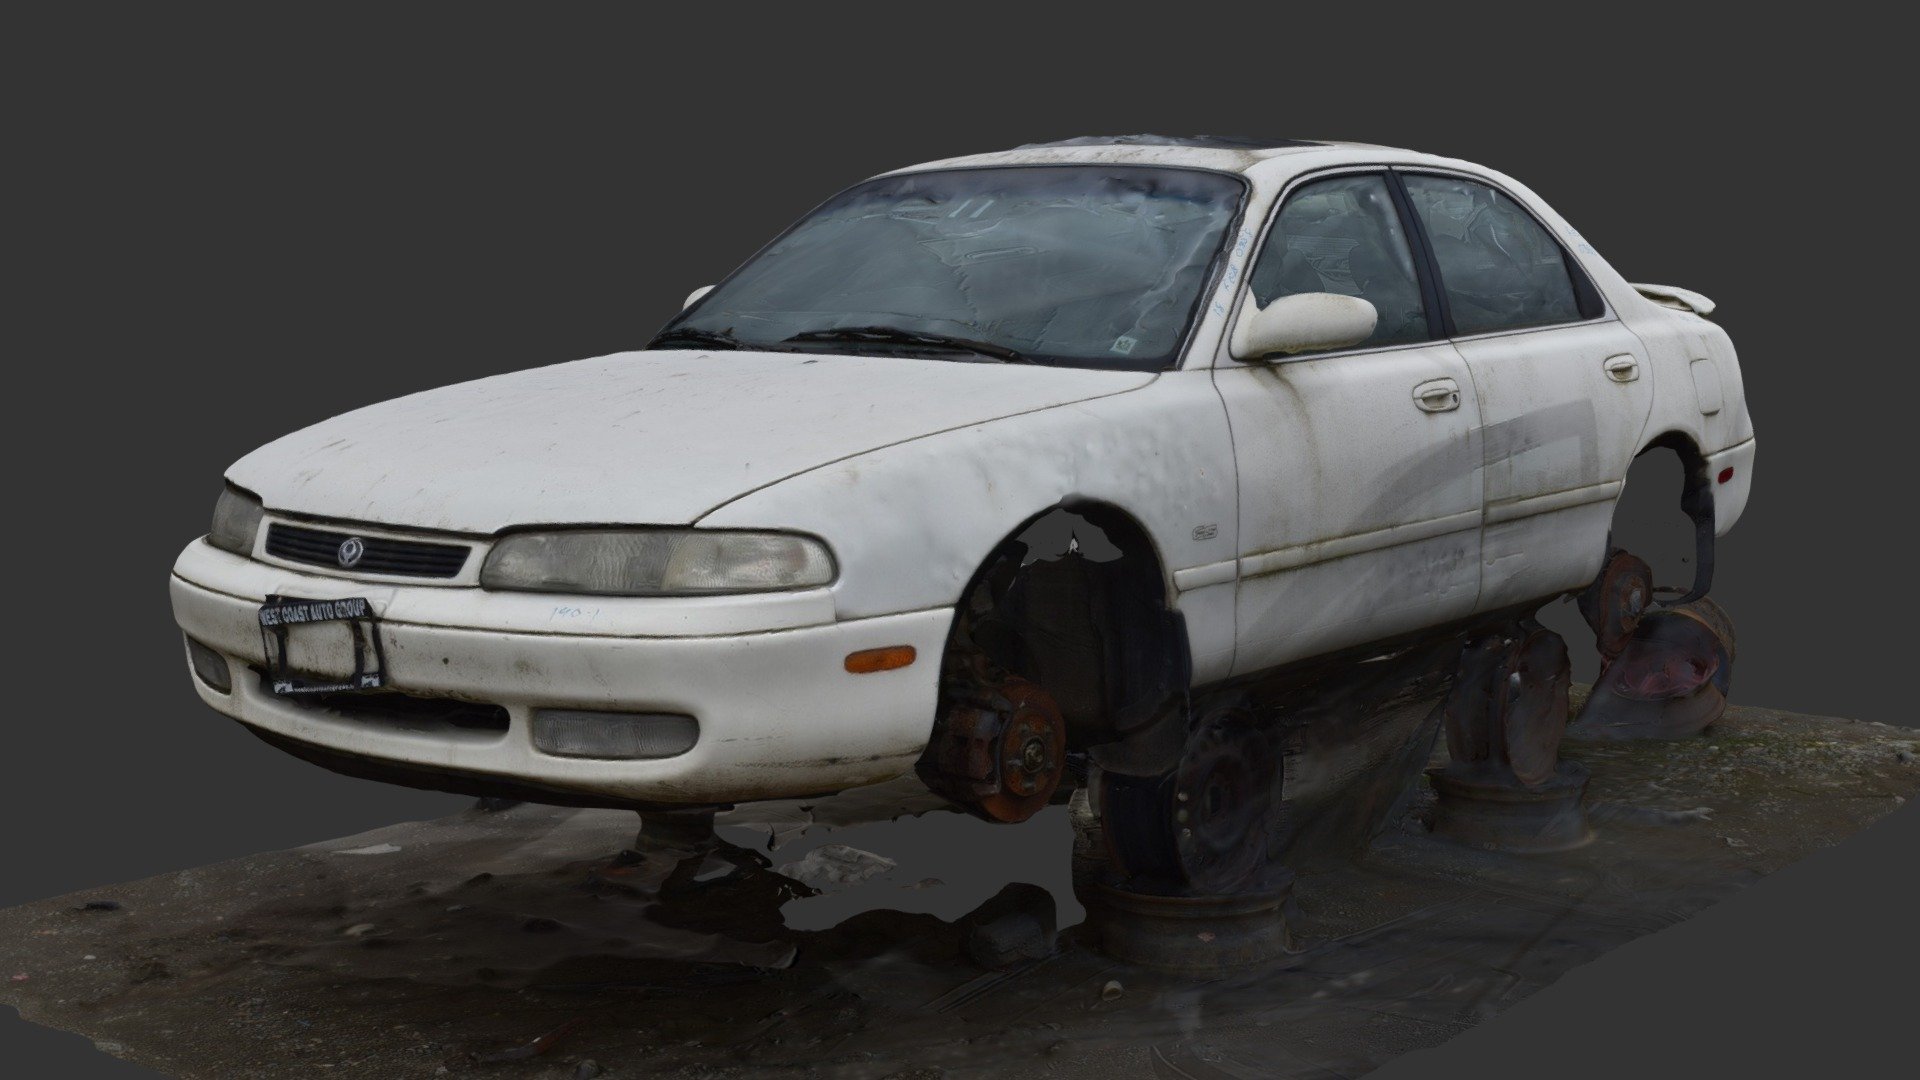 A car being sold for parts in a salvage yard. The photos were taken by https://sketchfab.com/rush_freak , he wanted me to process them for him.

Processed in Agisoft Photoscan 3d model